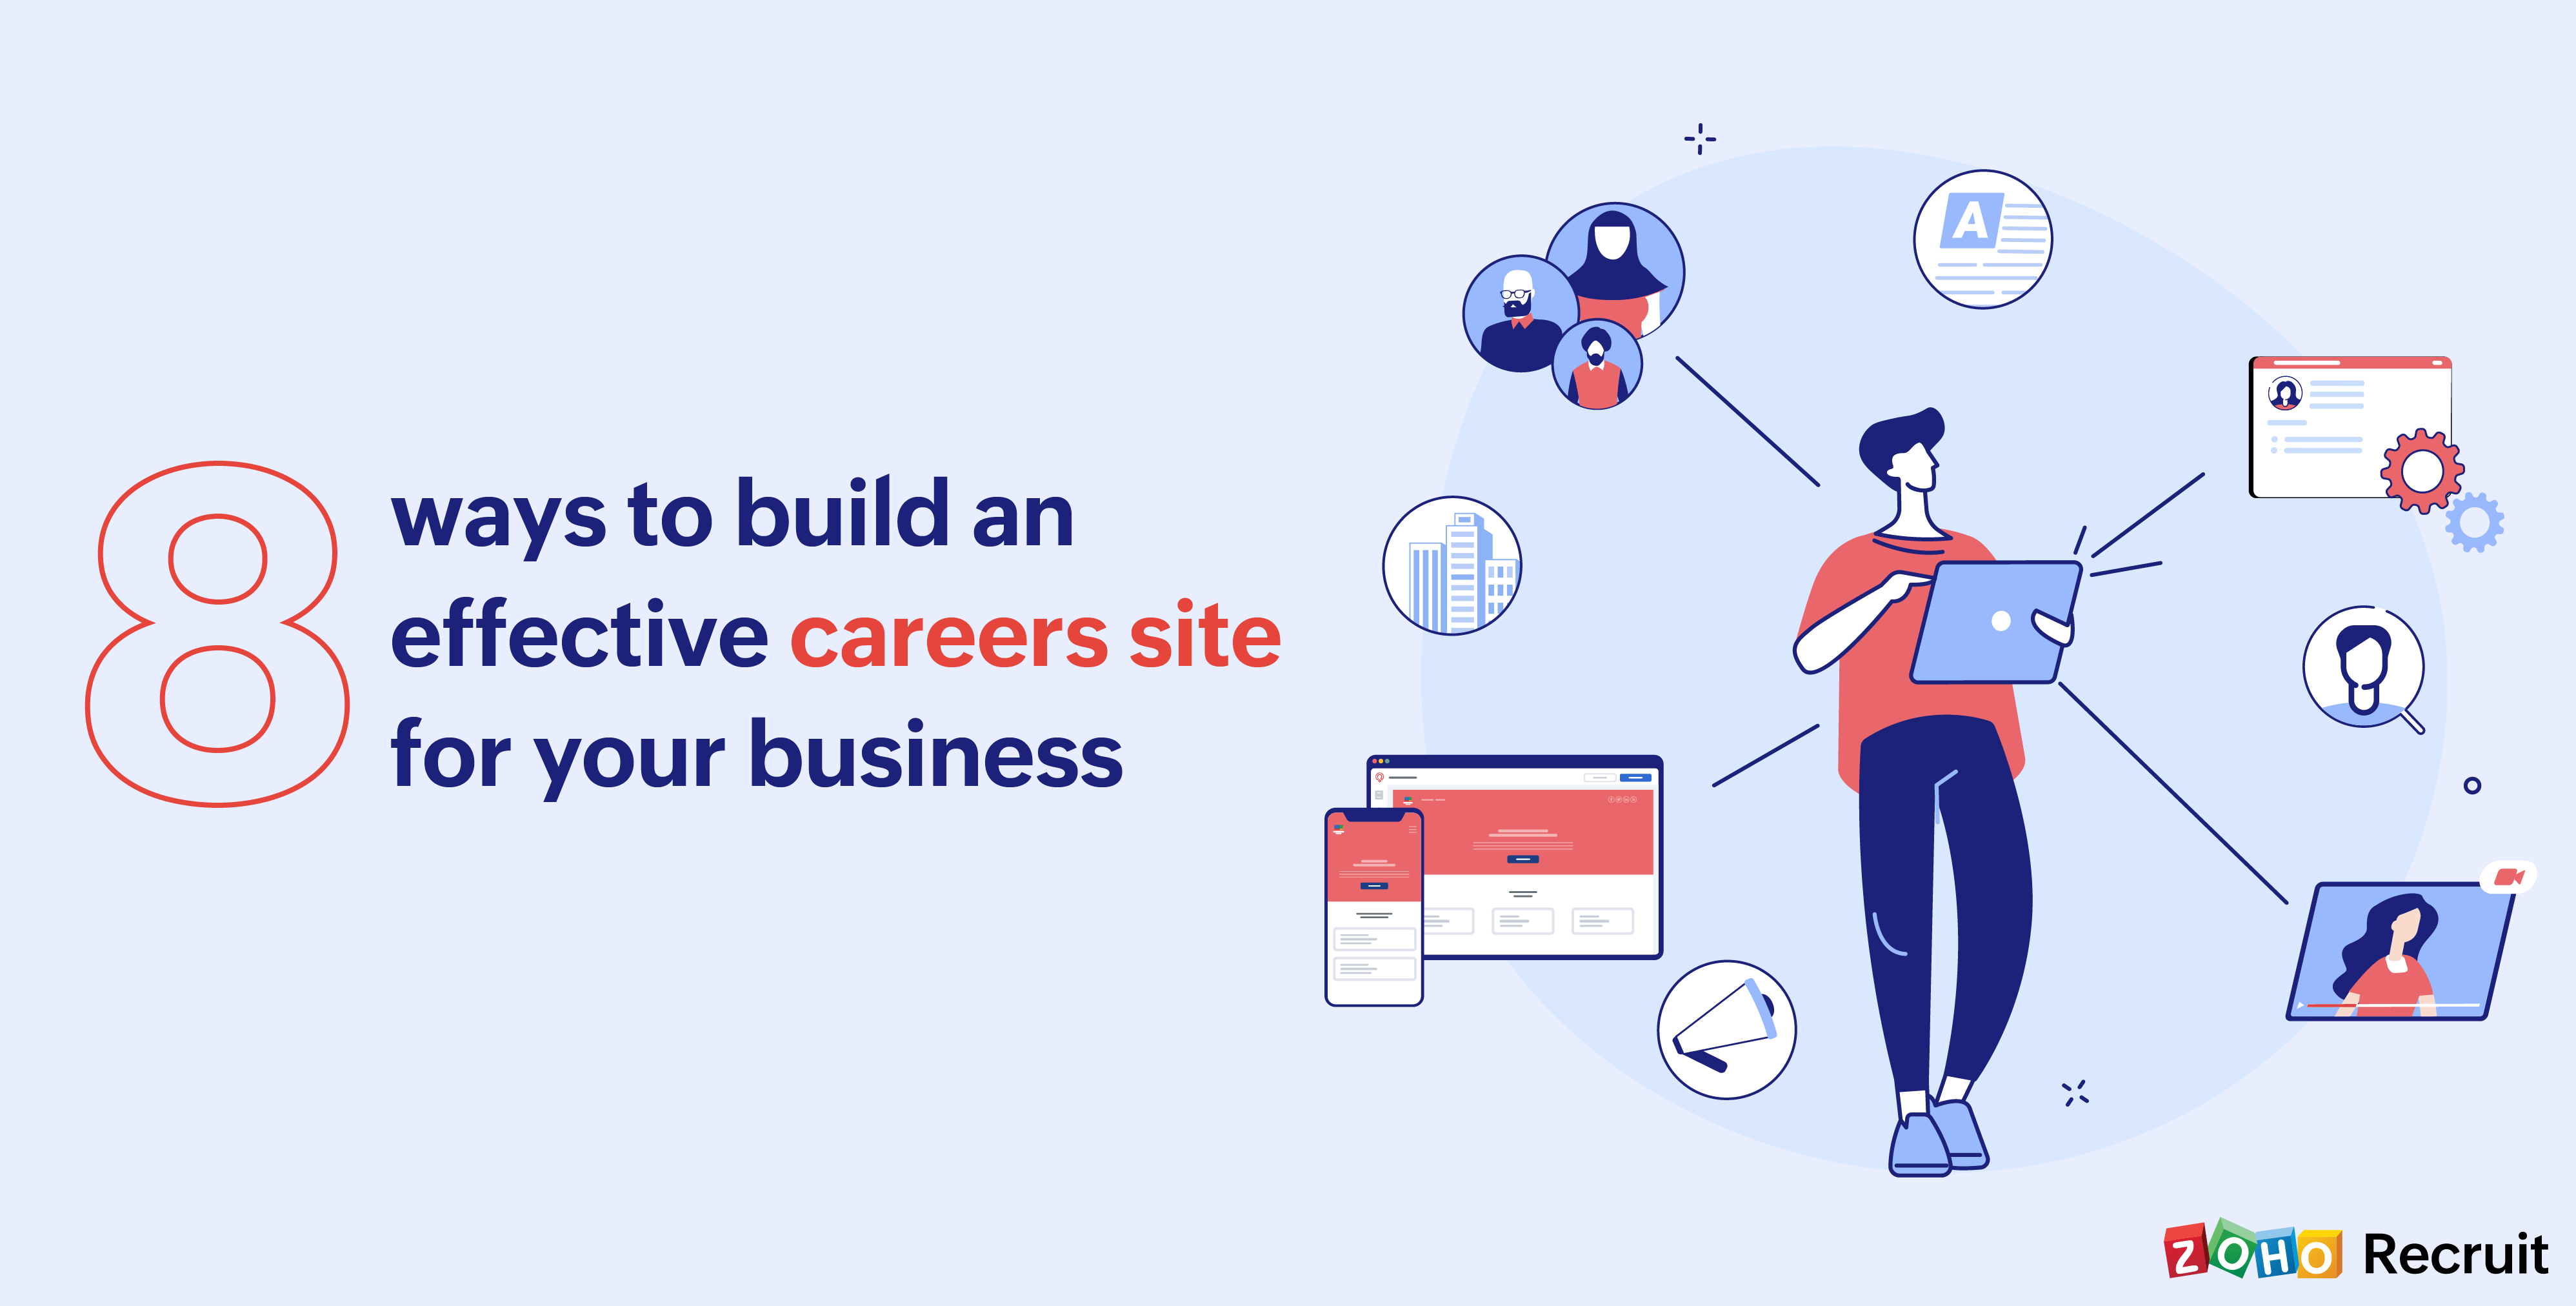 8 ways to build an effective careers site for your business